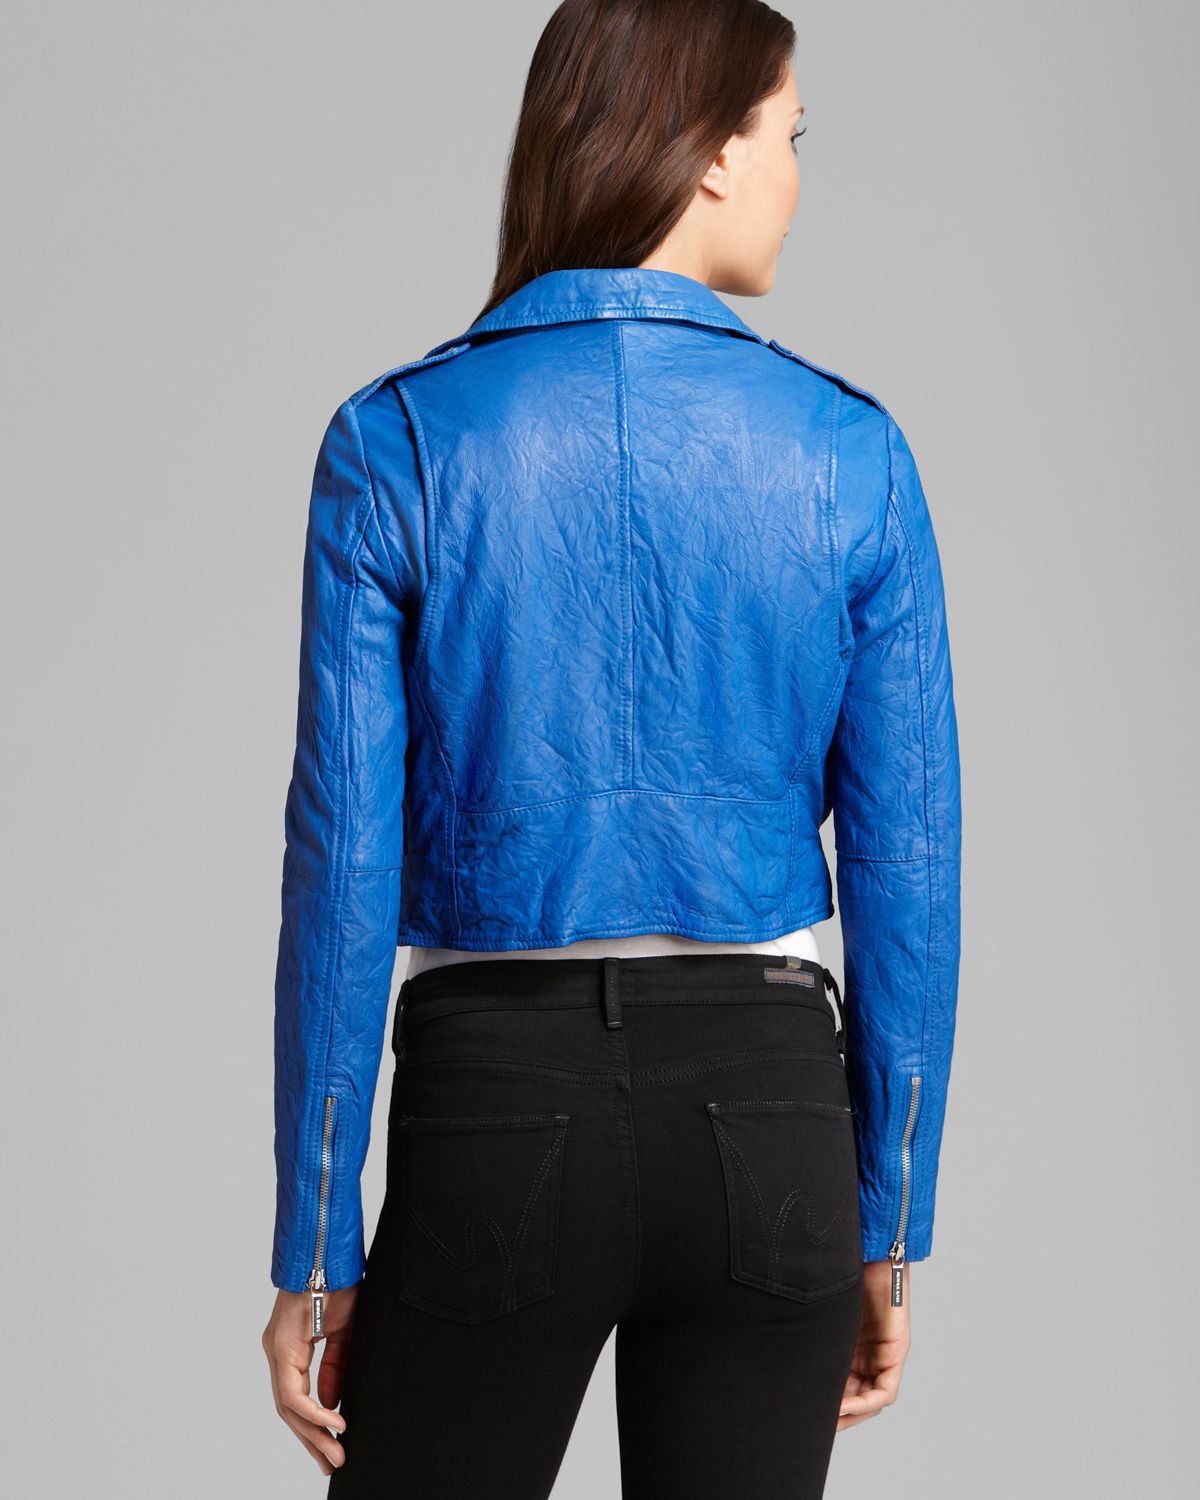 MICHAEL Michael Kors Cropped Leather Moto Jacket in Blue - Lyst